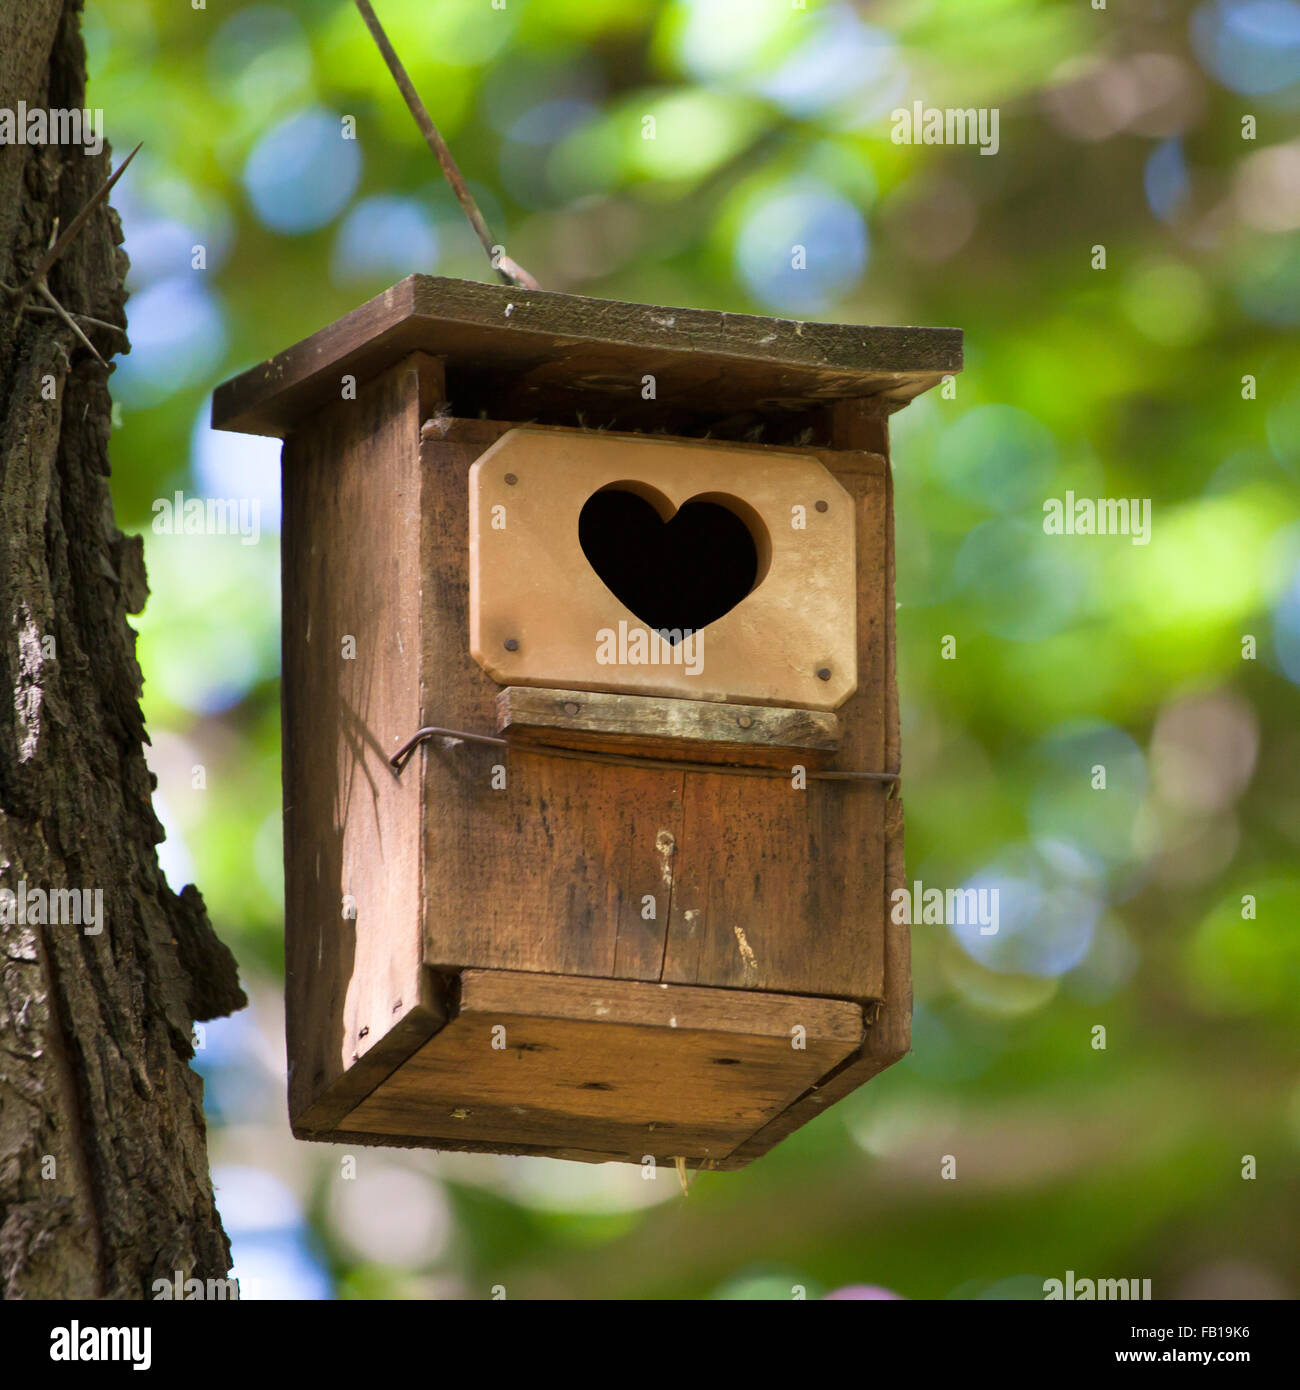 Bird house with the heart shapped entrance. Stock Photo